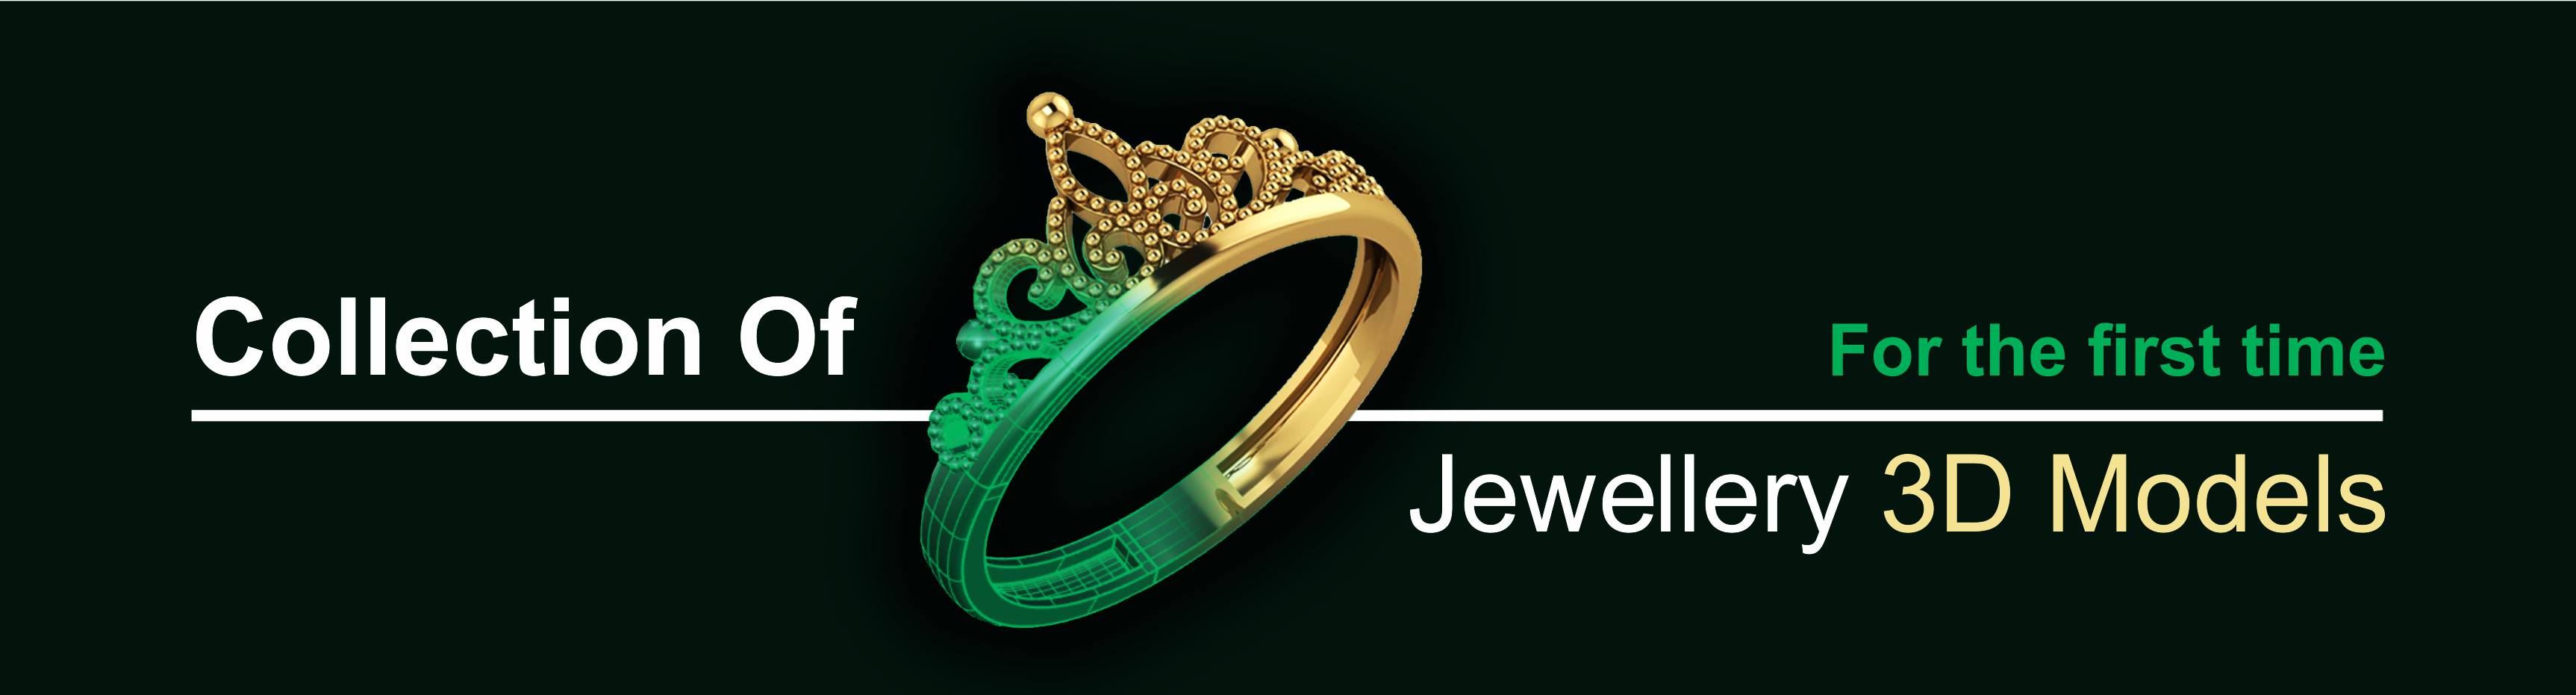 Collection Of Jewellery 3D Models